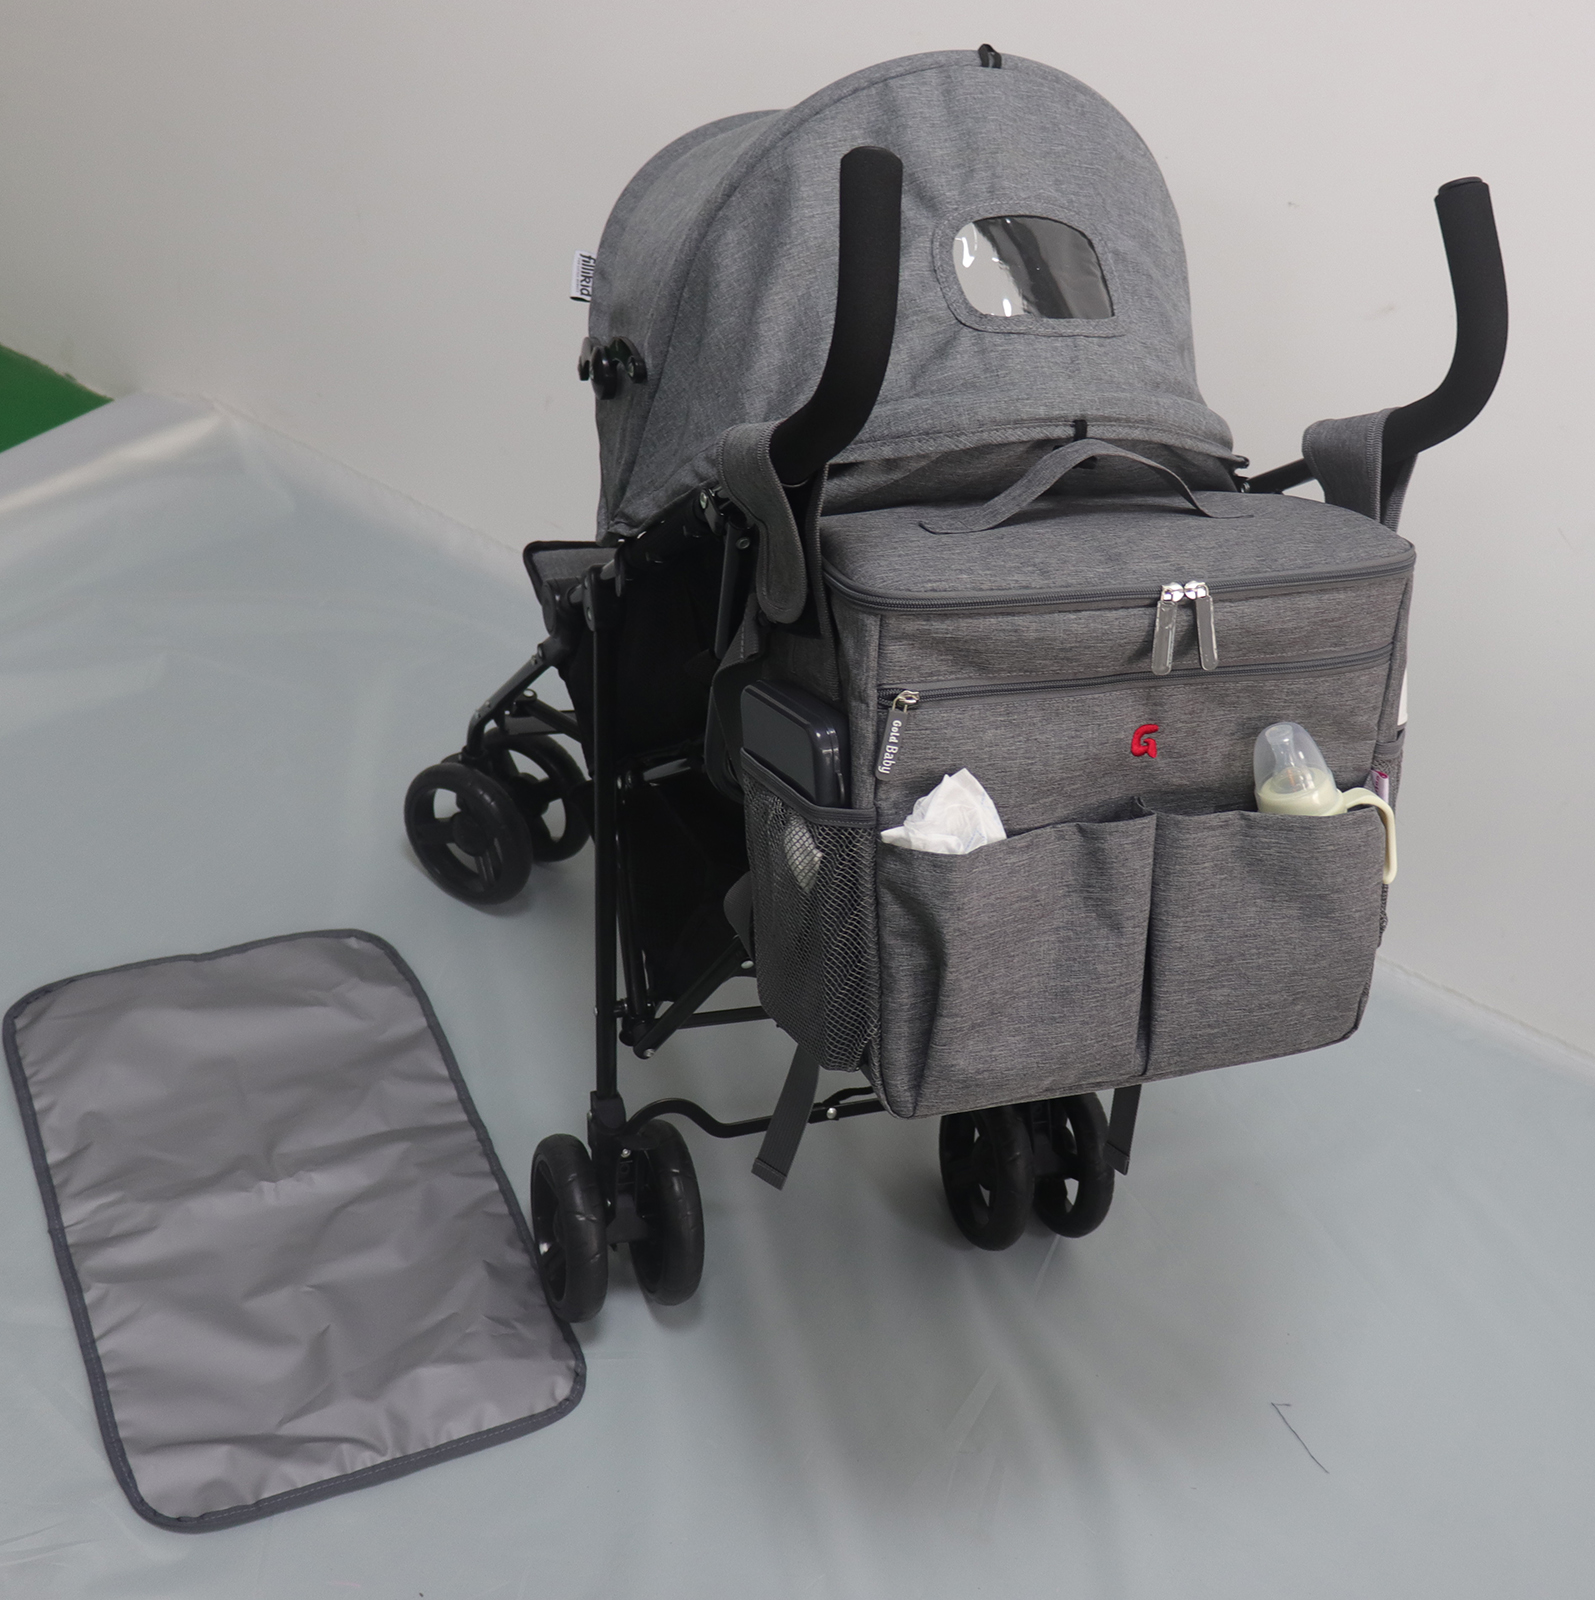 The functional stroller diaper bags organizer fit all strollers